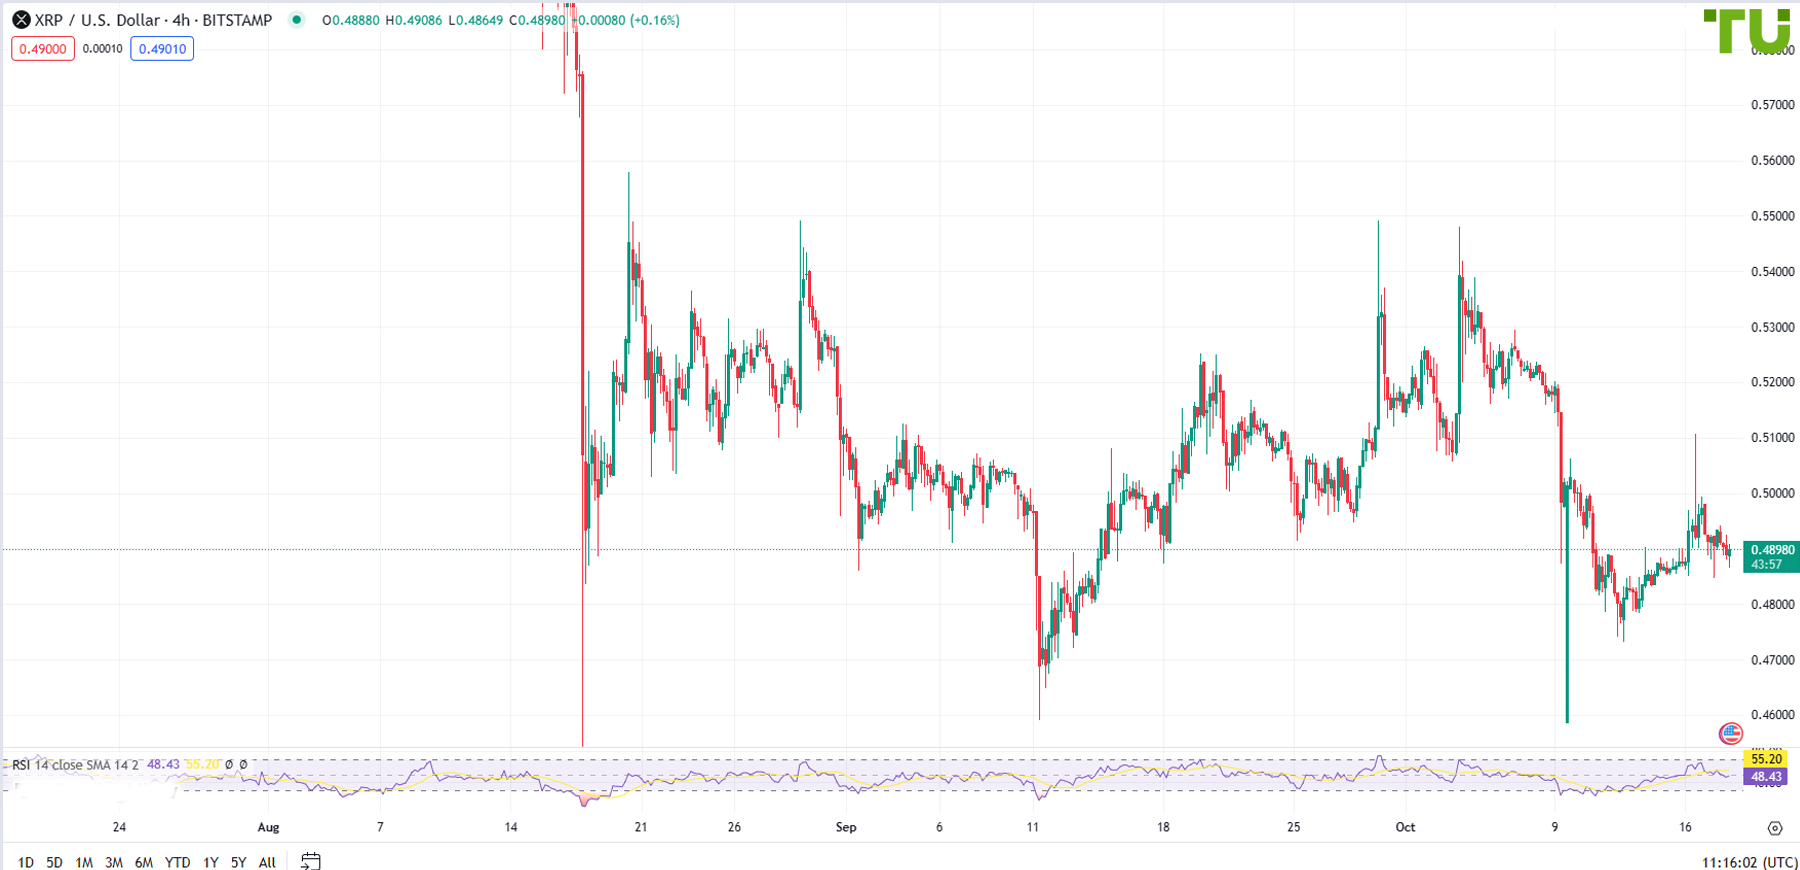 XRP/USD returned to support after growth